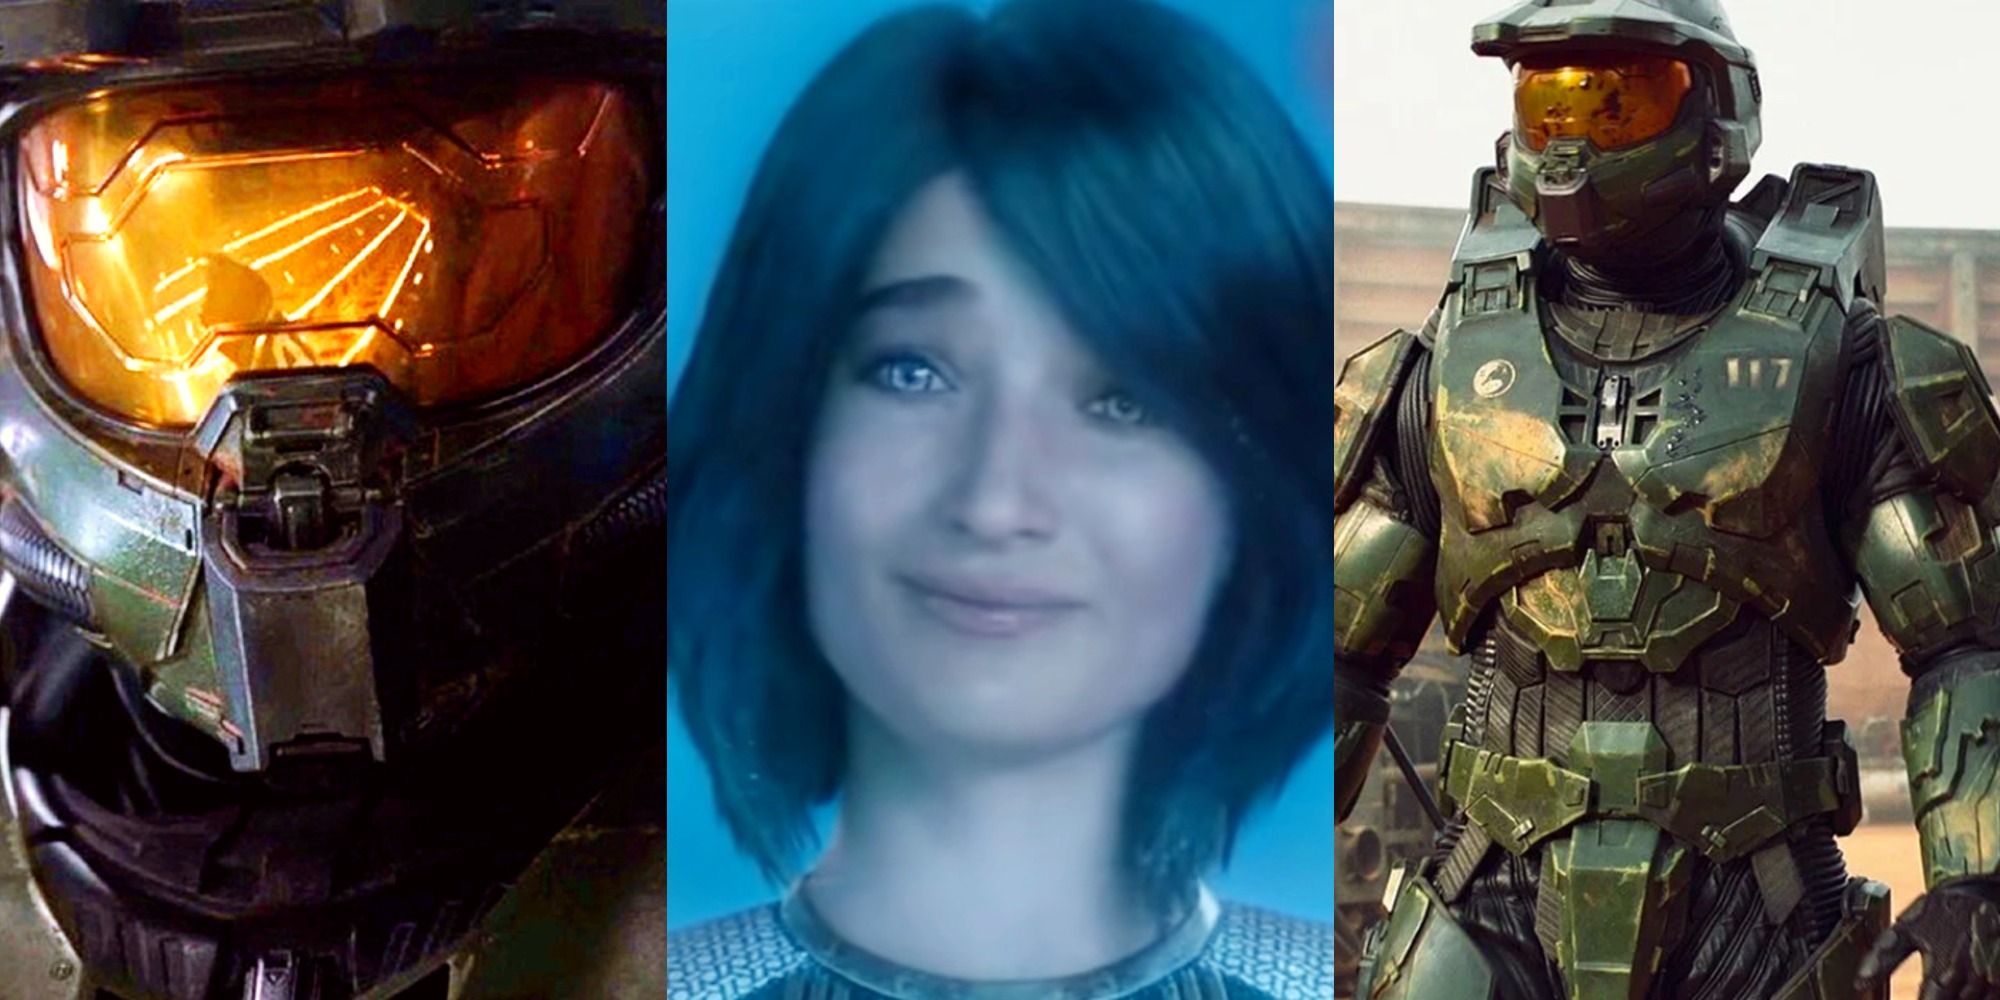 The Funniest Halo Memes Celebrating The Show's Release